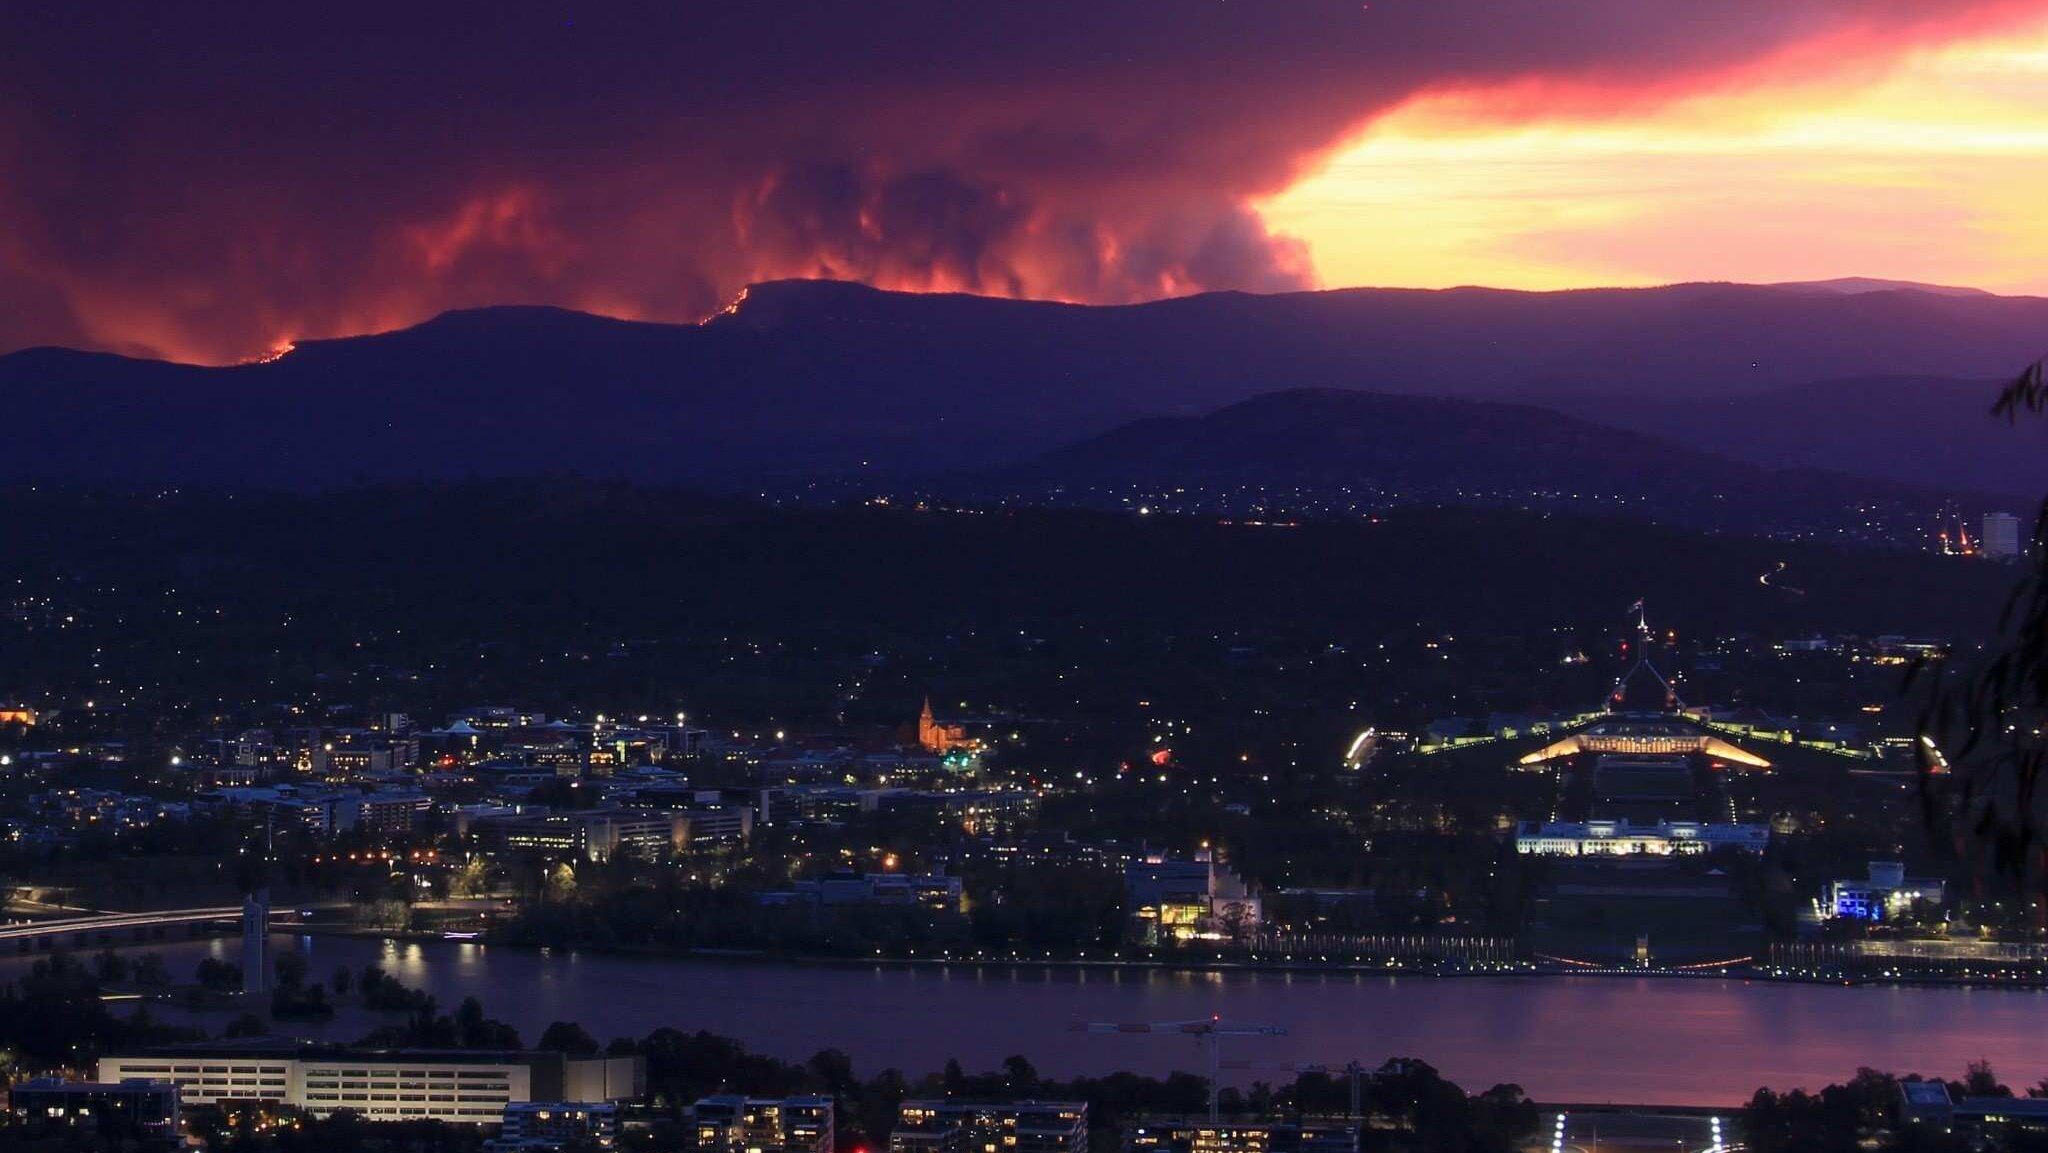 canberra community not adequately prepared for future bushfires, act government inquiry hears